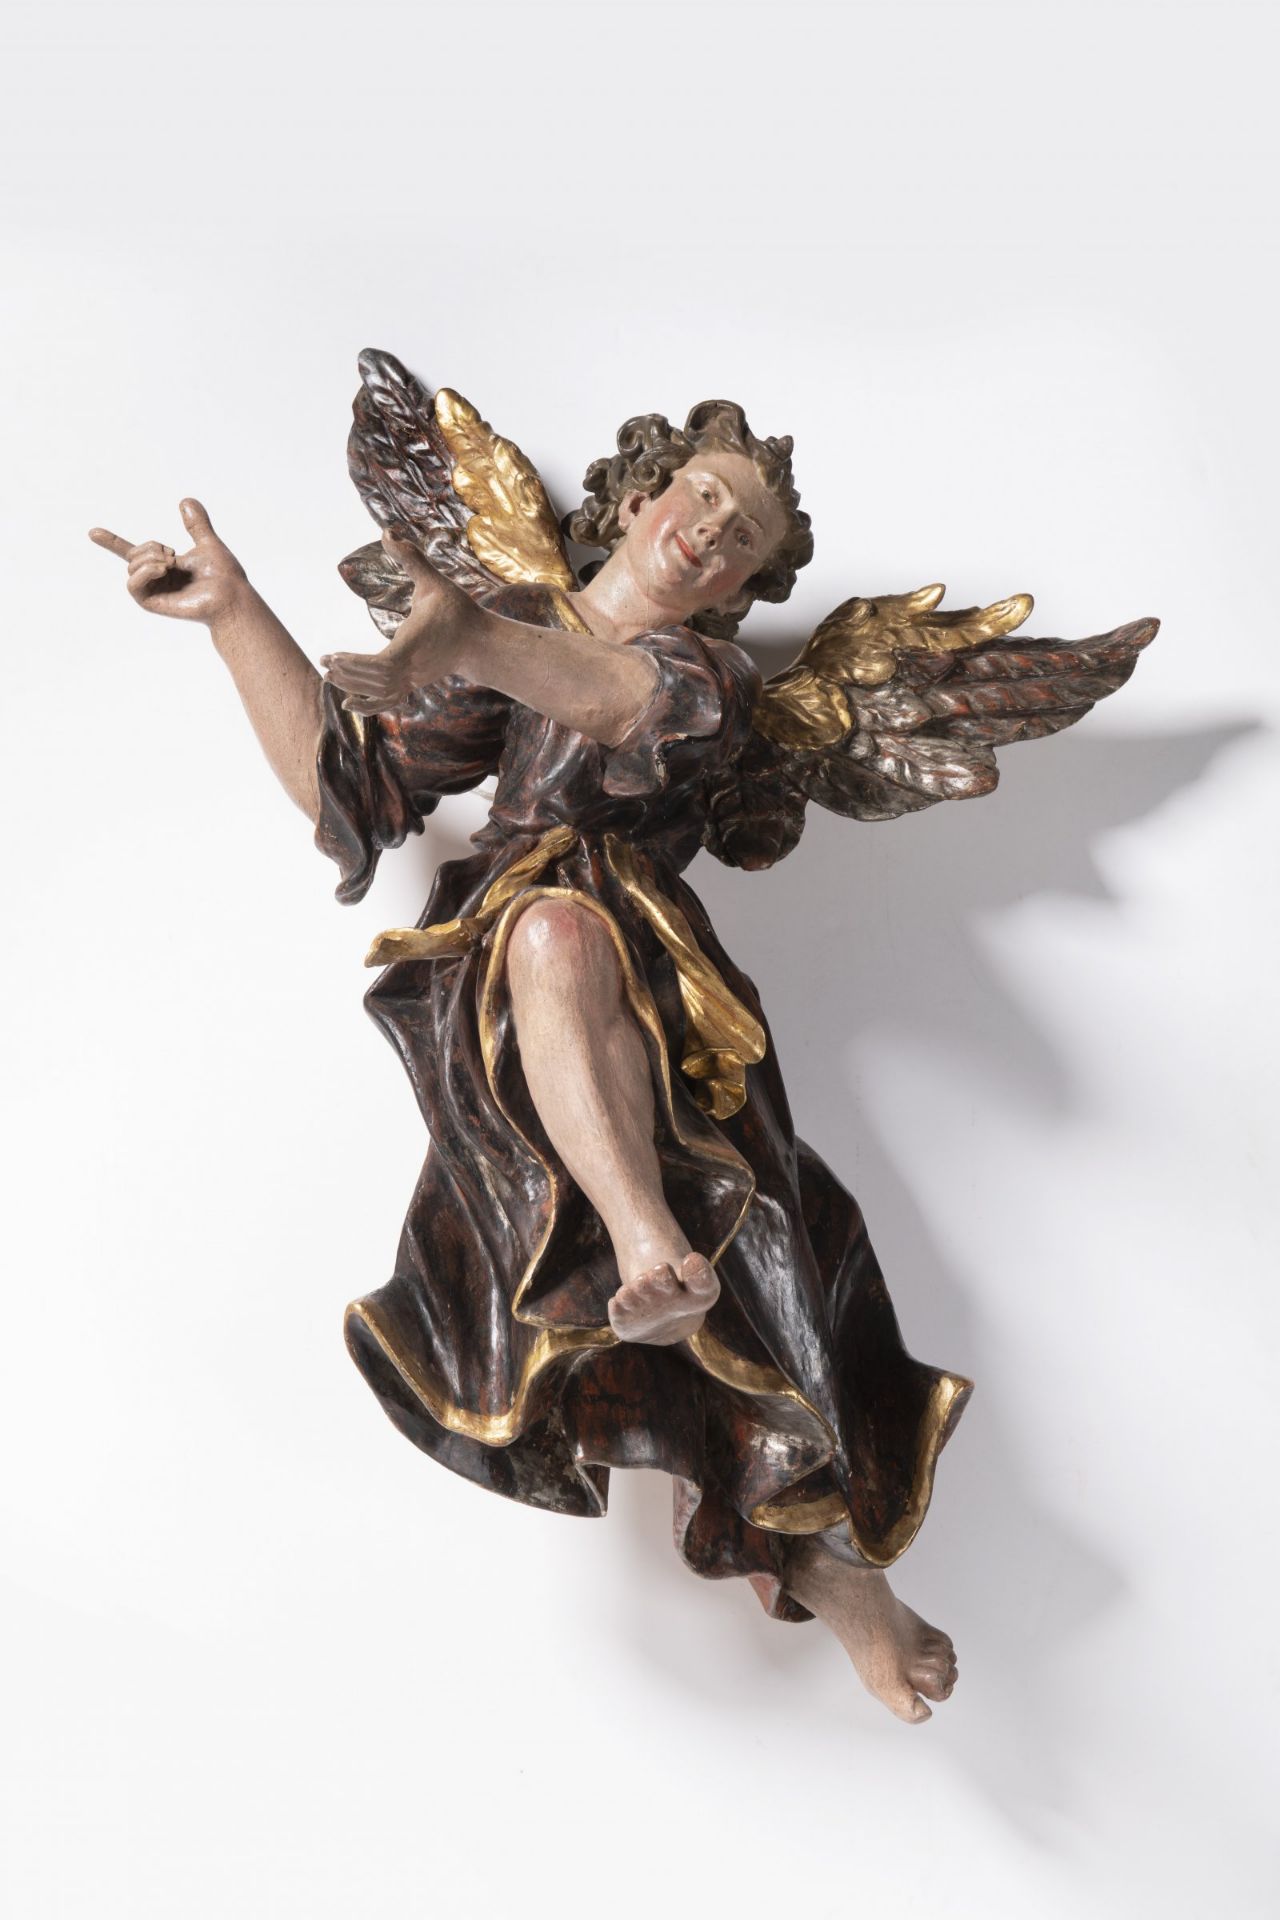 PAIR OF FLYING ANGELS First half of 18th century Germany Polychrome and gilded wood 60 cm A pair